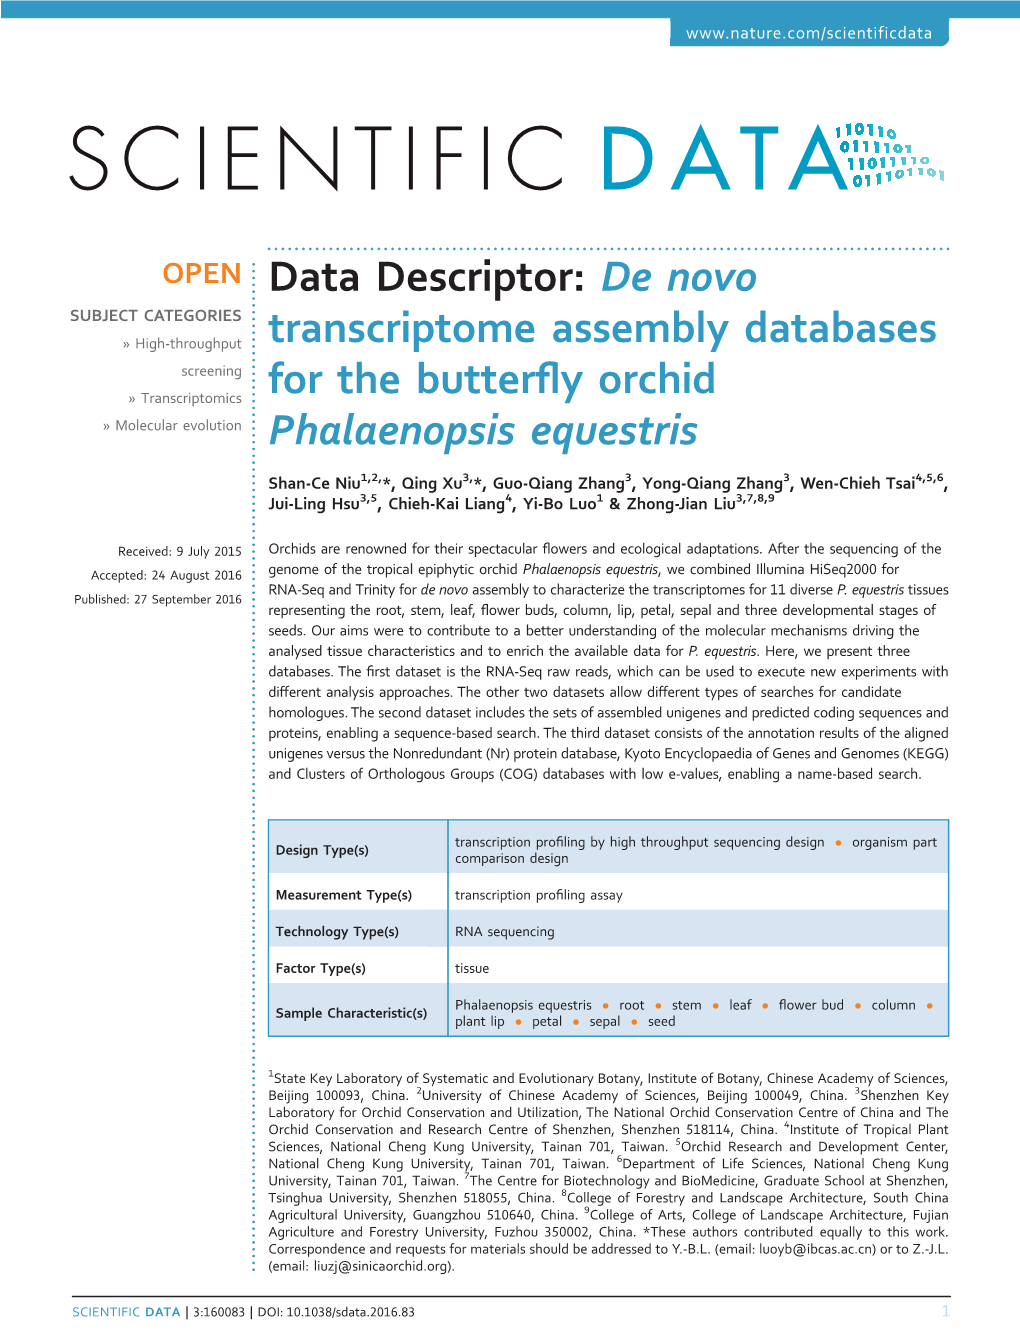 De Novo Transcriptome Assembly Databases for the Butterfly Orchid